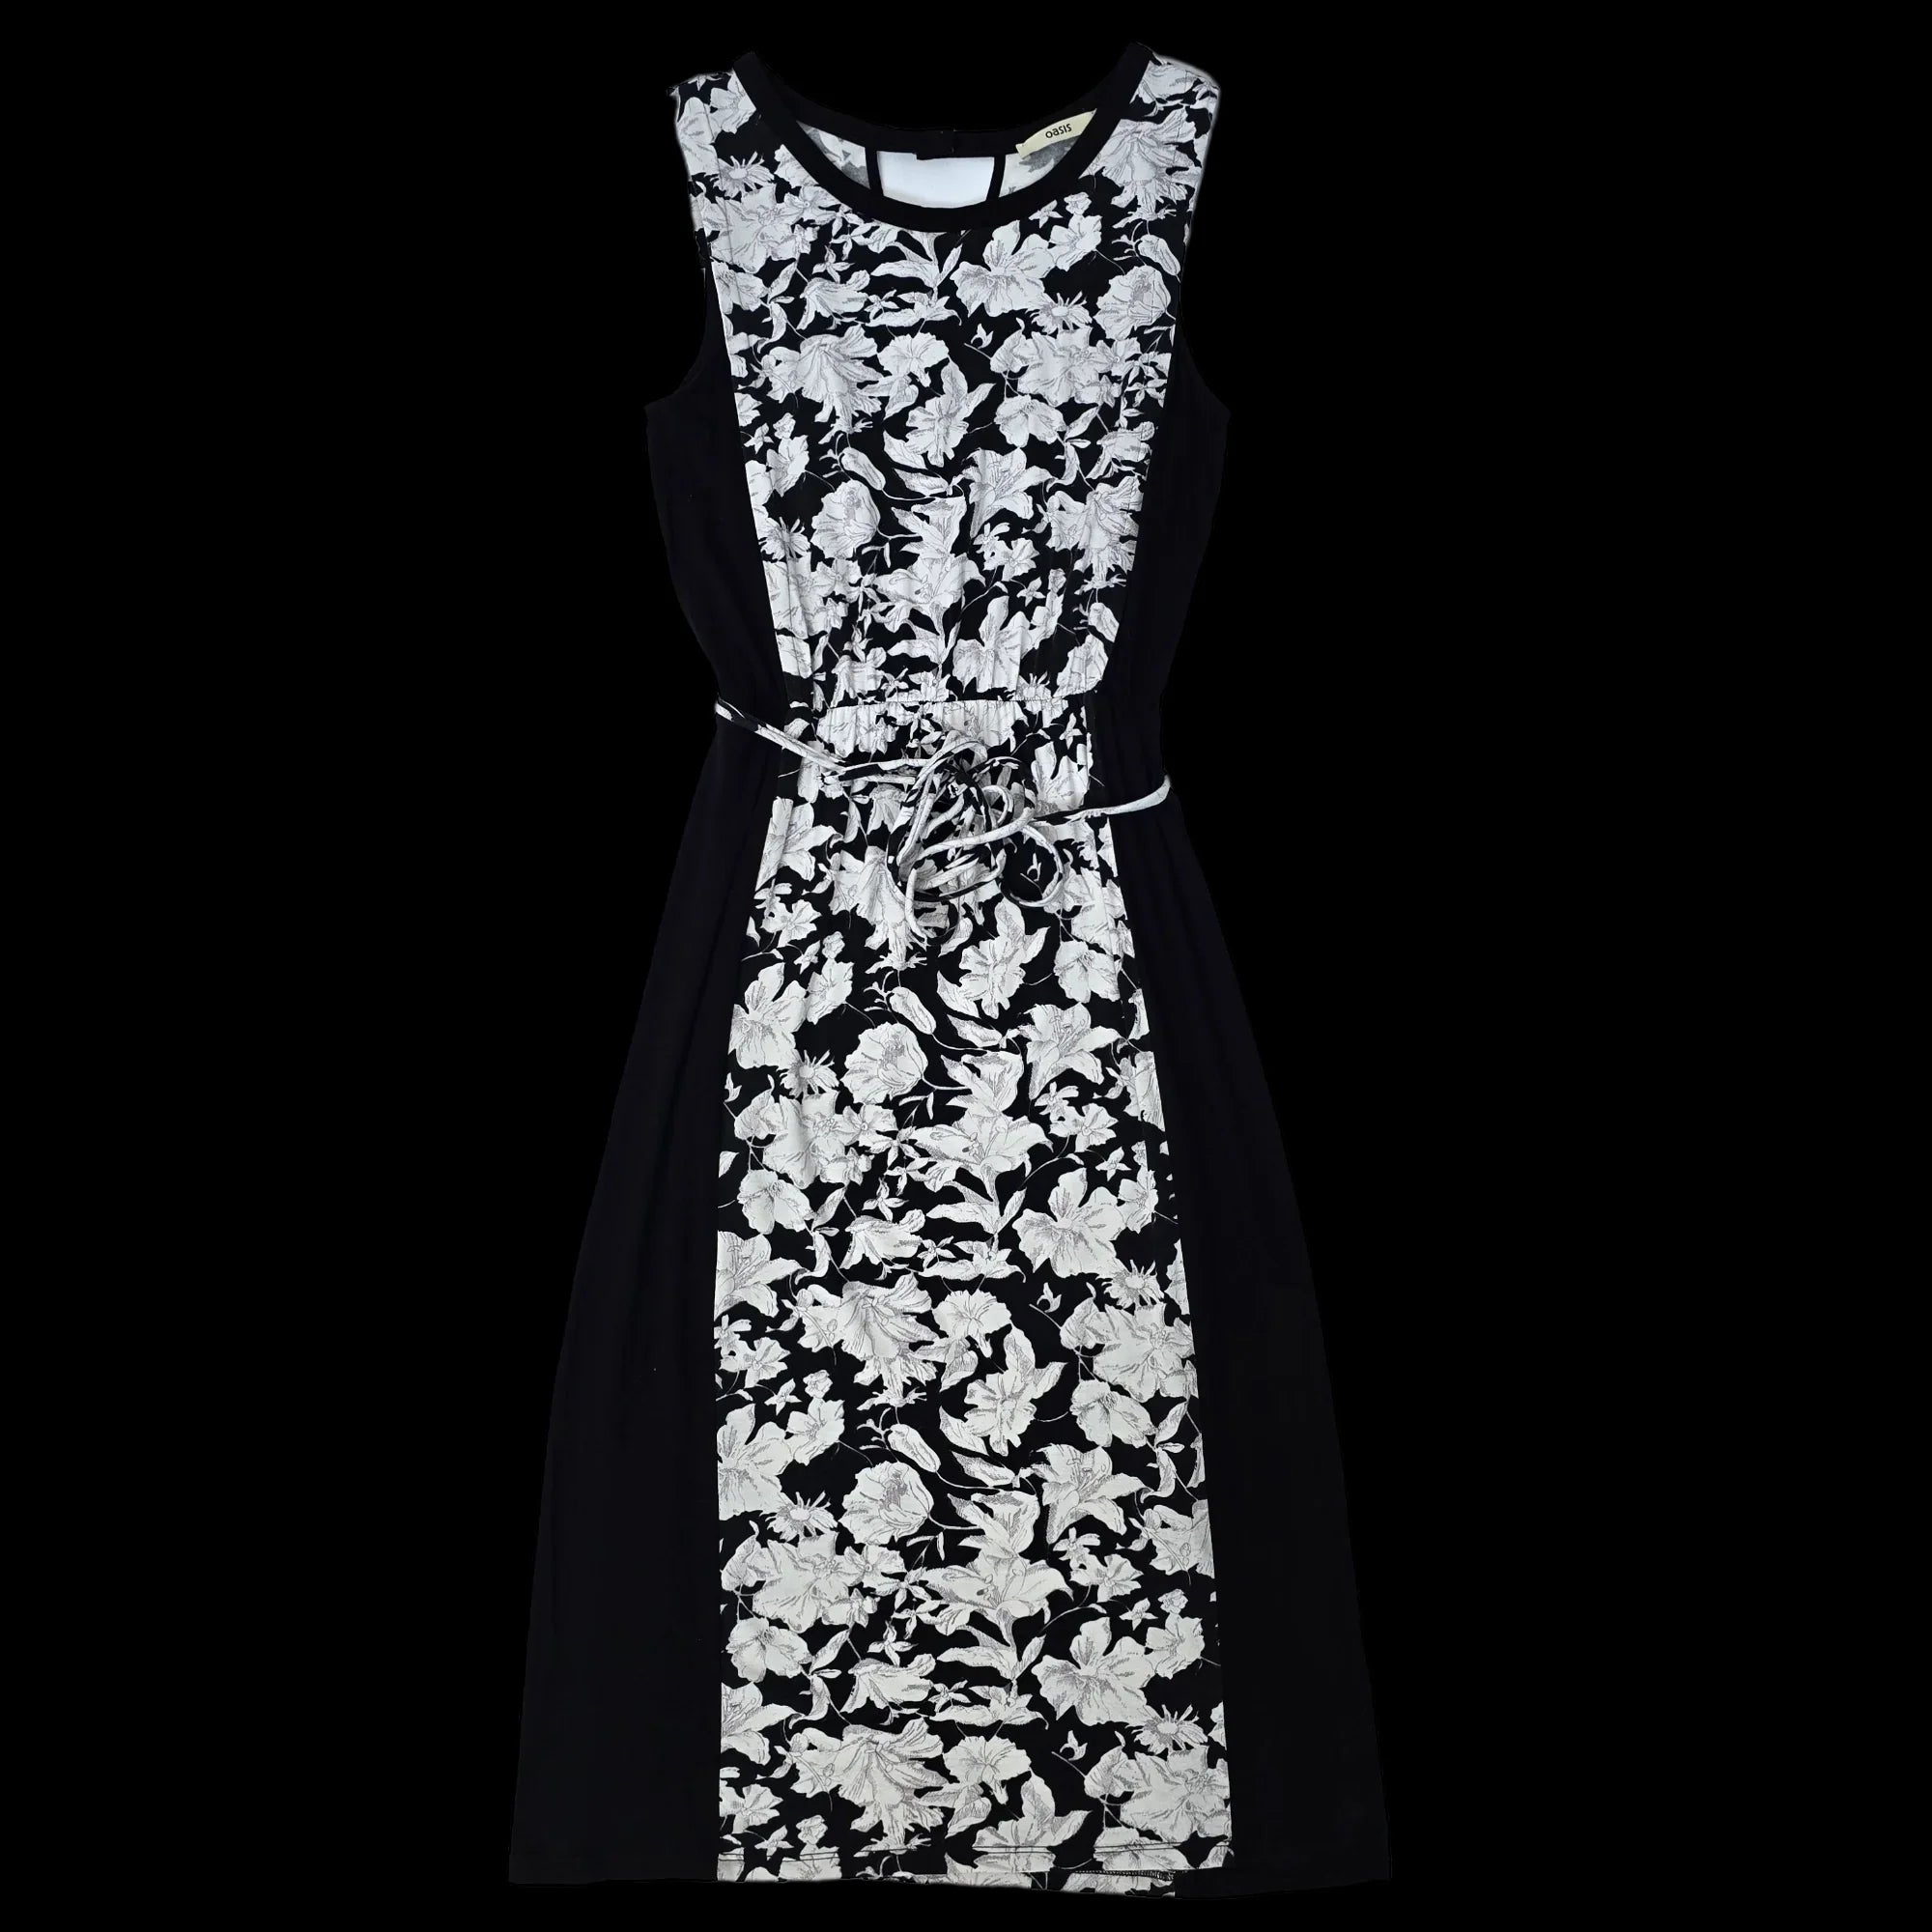 Women’s Oasis Black White Fit And Flare Dress UK Small